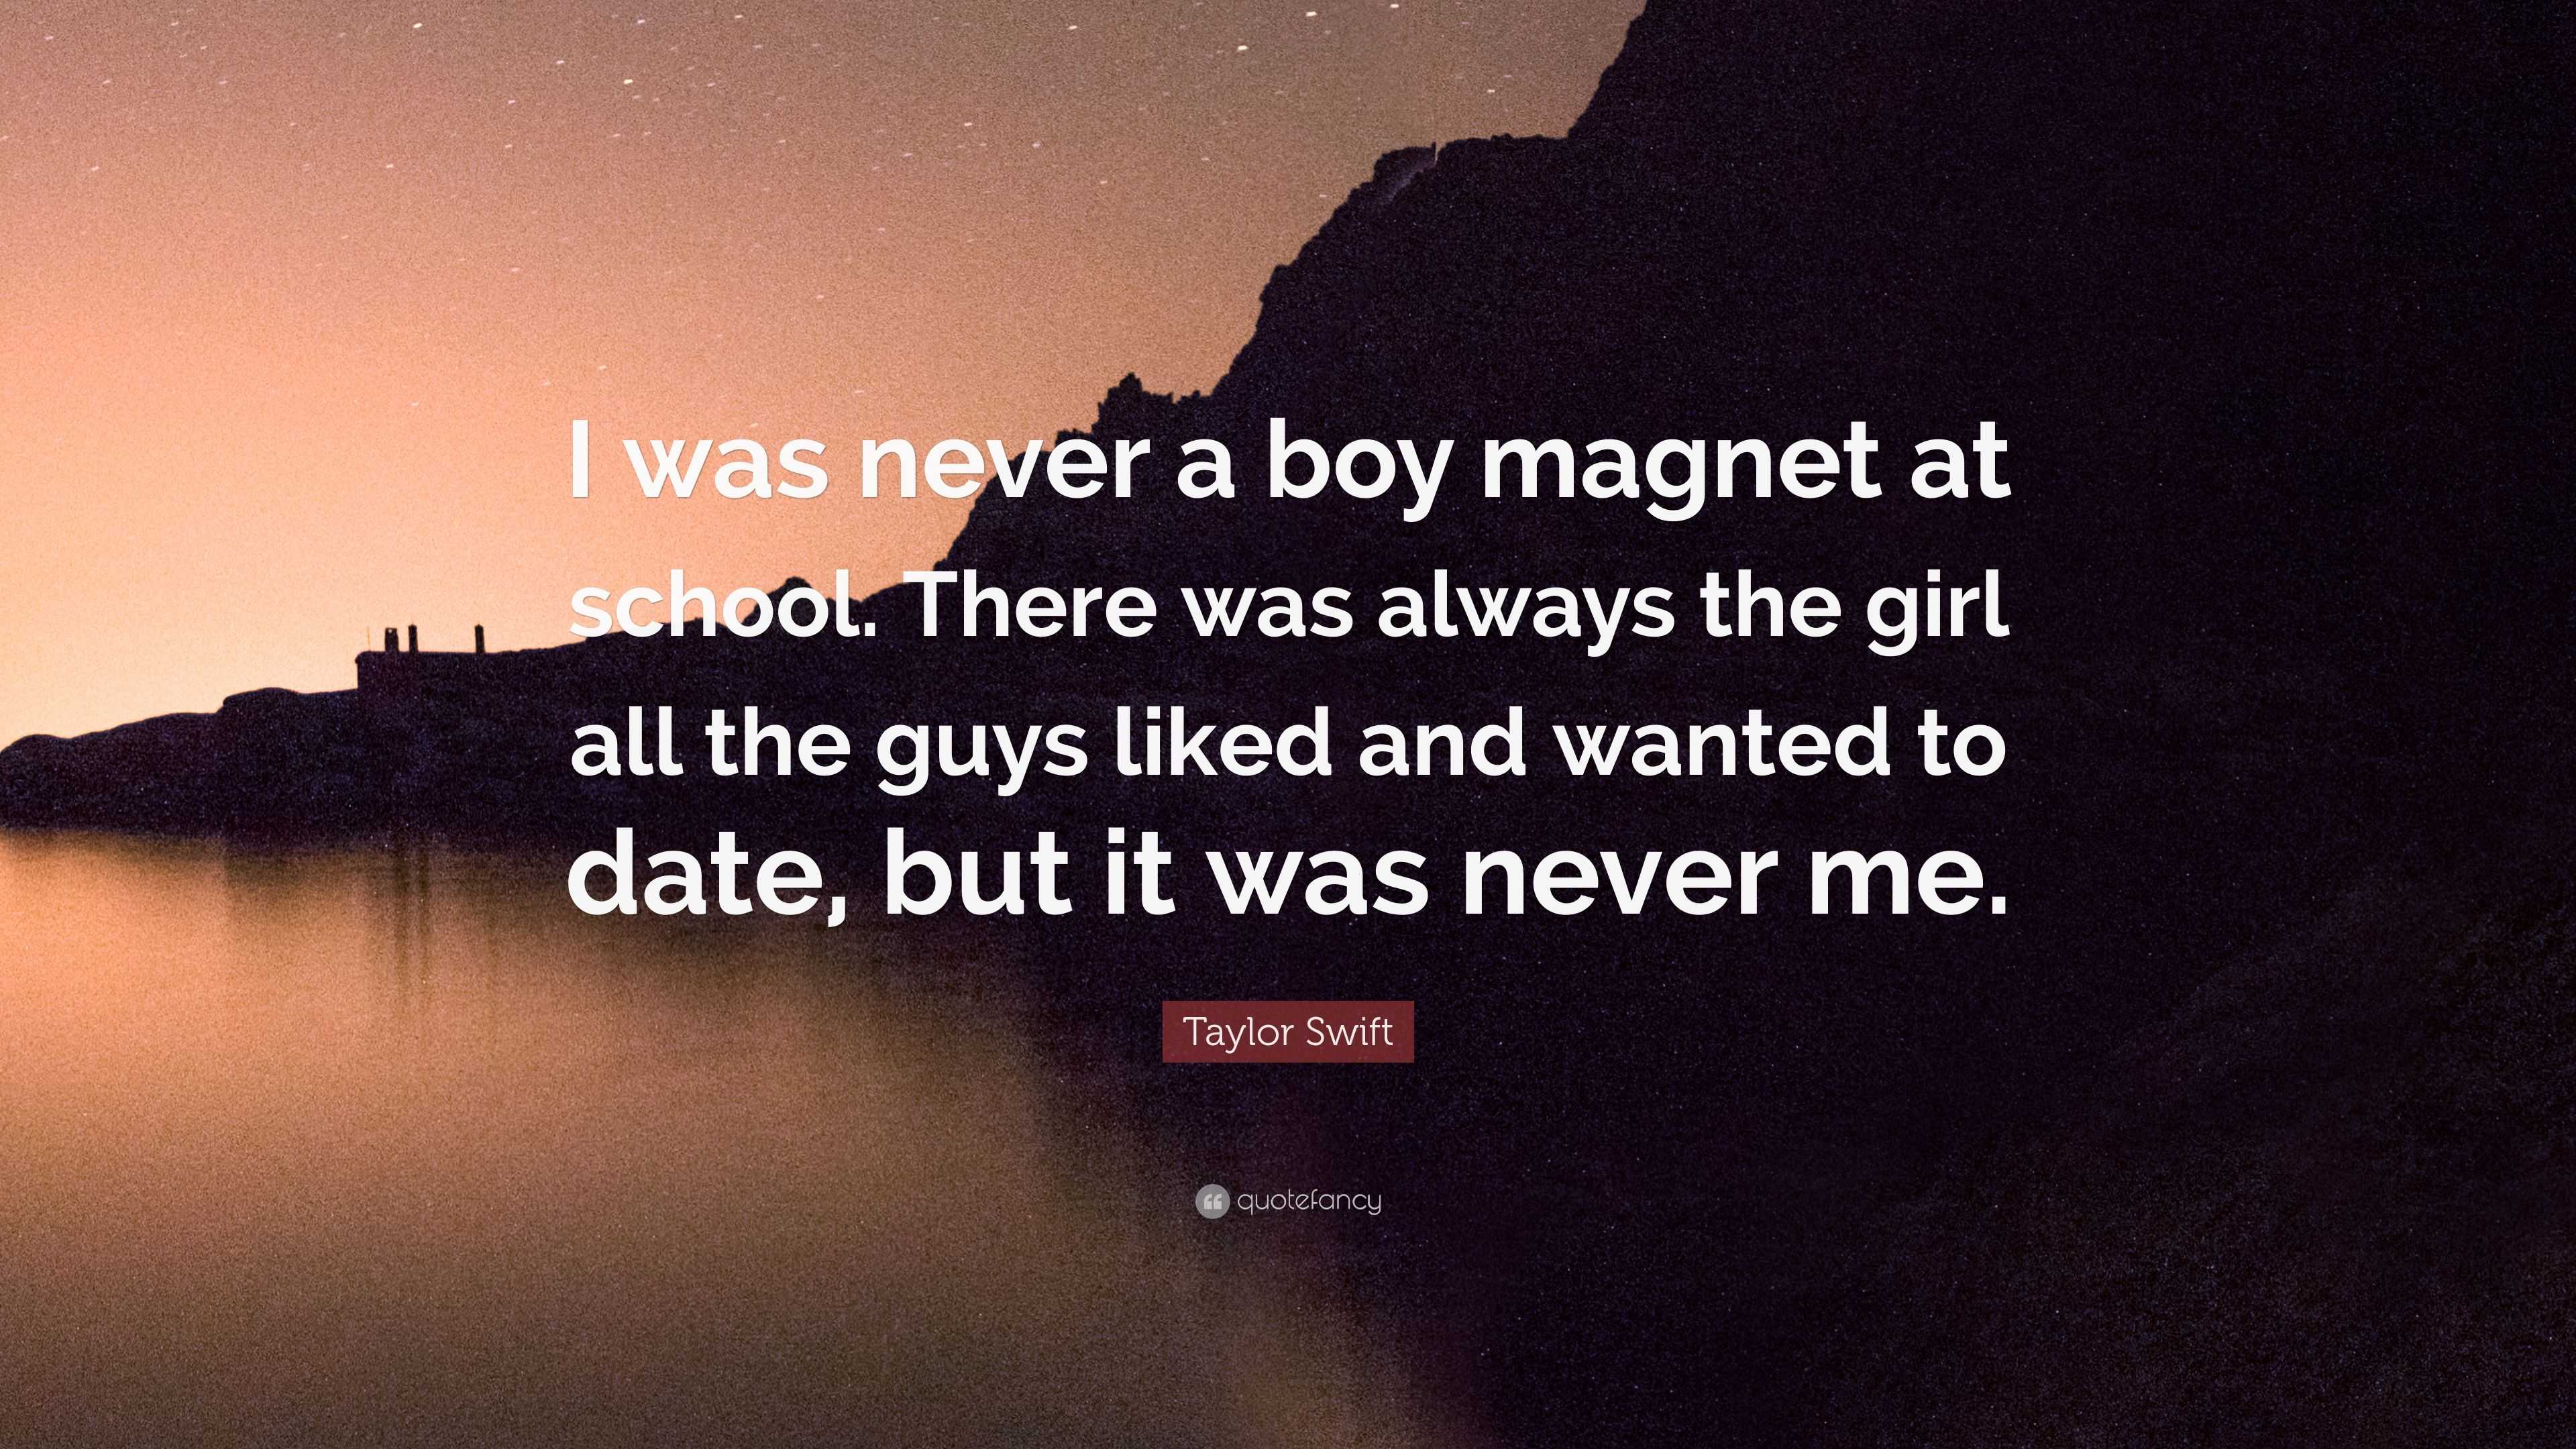 https://quotefancy.com/media/wallpaper/3840x2160/4290998-Taylor-Swift-Quote-I-was-never-a-boy-magnet-at-school-There-was.jpg